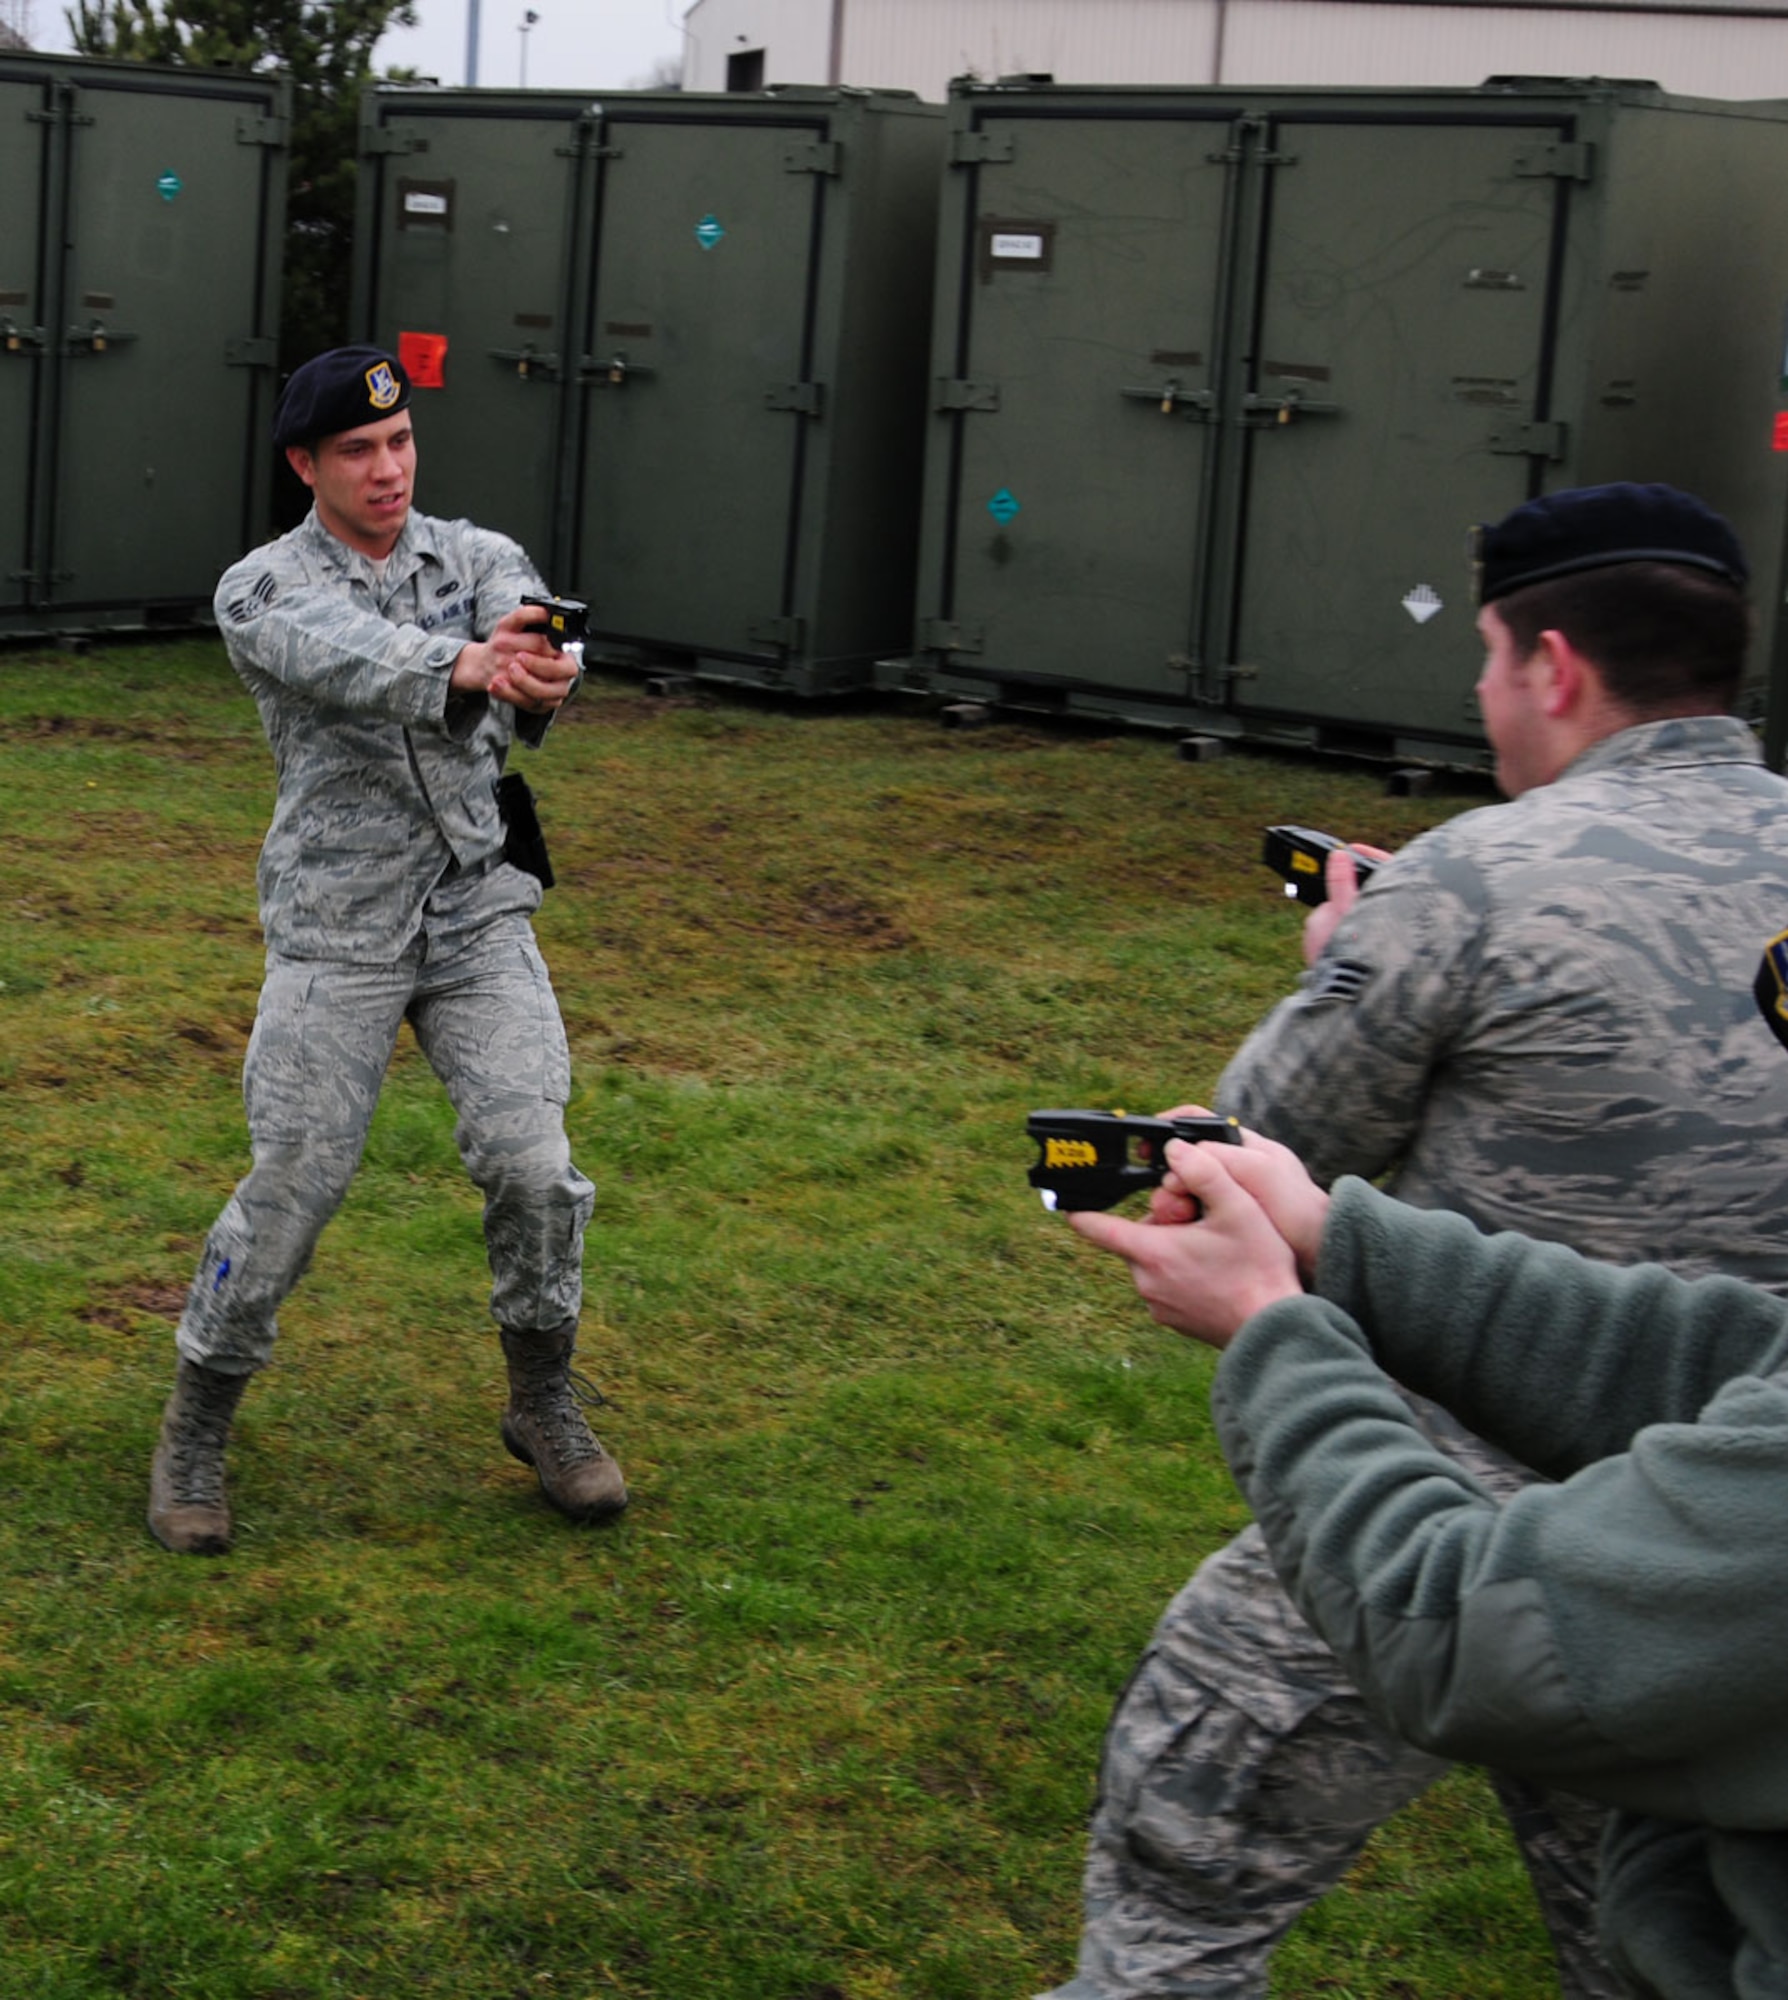 Airmen from the 100th Security Forces Squadron practice using Tasers on each other during a training session Feb. 11, 2013, at building 632, RAF Mildenhall, England. All 100th SFS Airmen, ranging from senior airman to technical sergeant, must train to a certain standard in order to meet legal requirements and become certified to use the weapon. (U.S. Air Force photo by Karen Abeyasekere/Released)